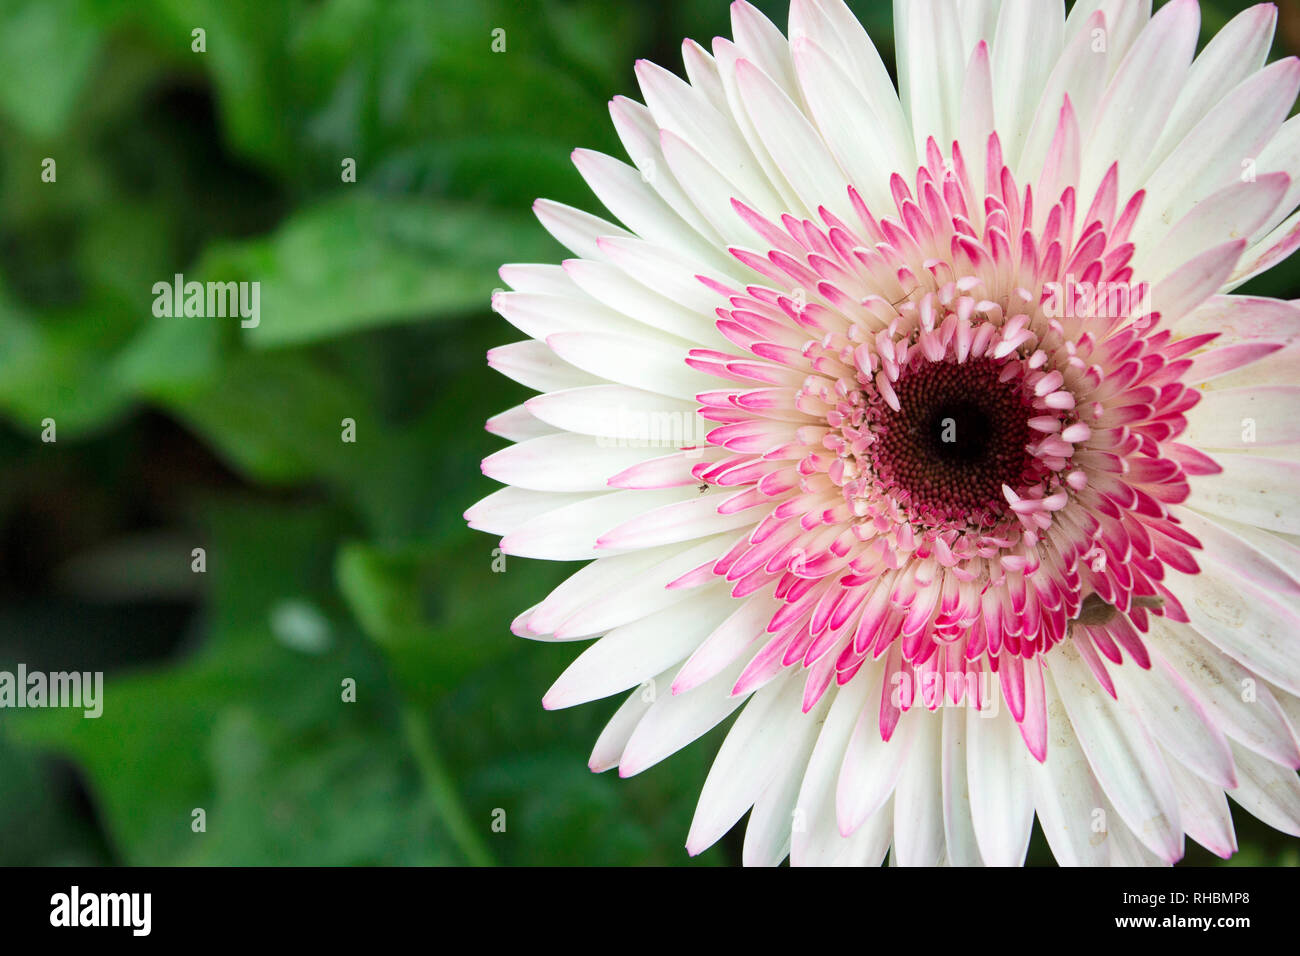 White and Pink Gerbera flower, genus of Asteraceae or daisy family, Maharashtra, India Stock Photo